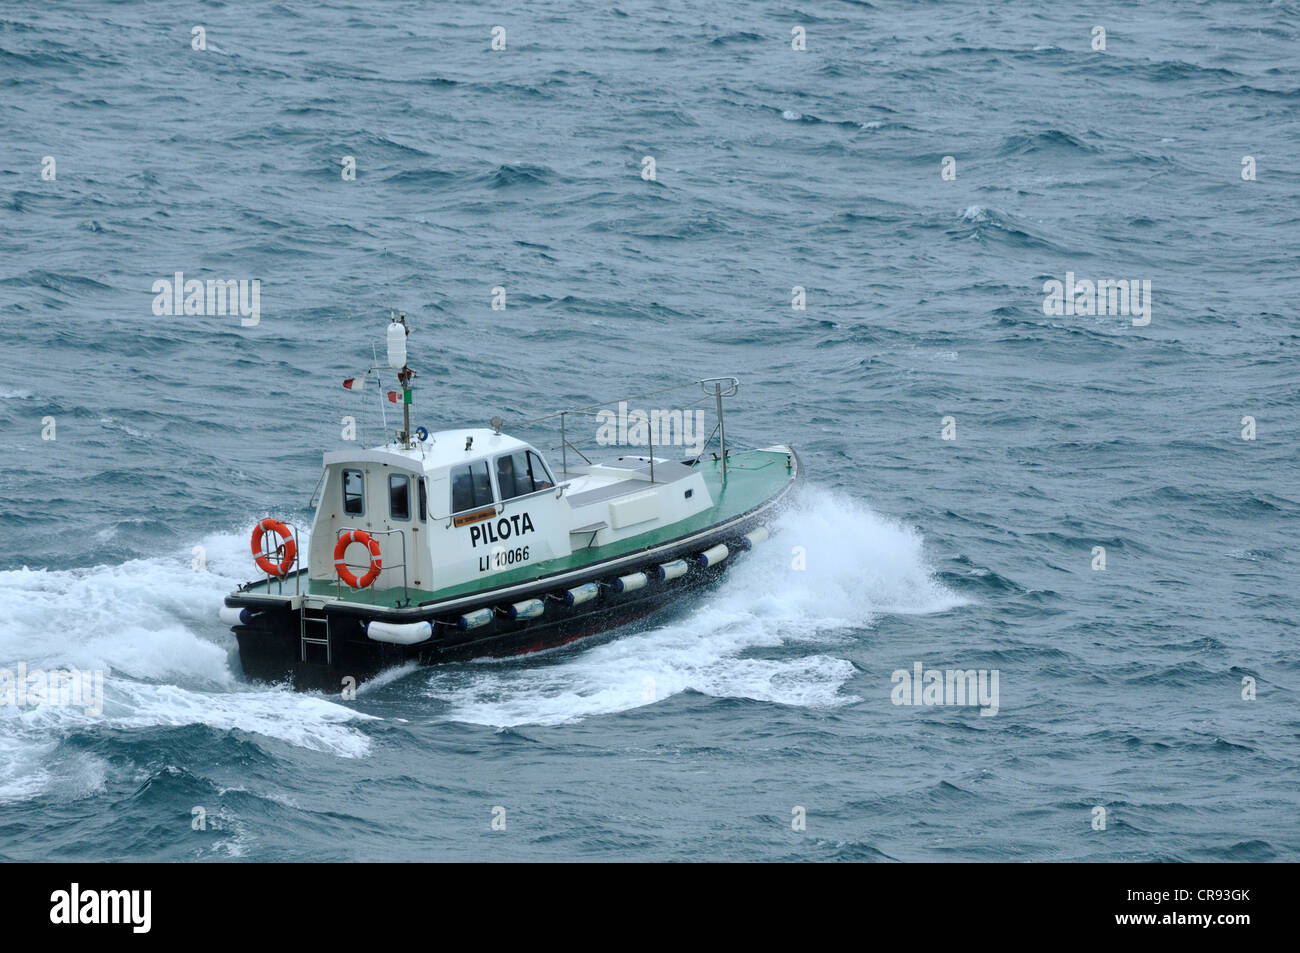 Pilot boat from the port of Bastia, Corsica, France, Europe Stock Photo